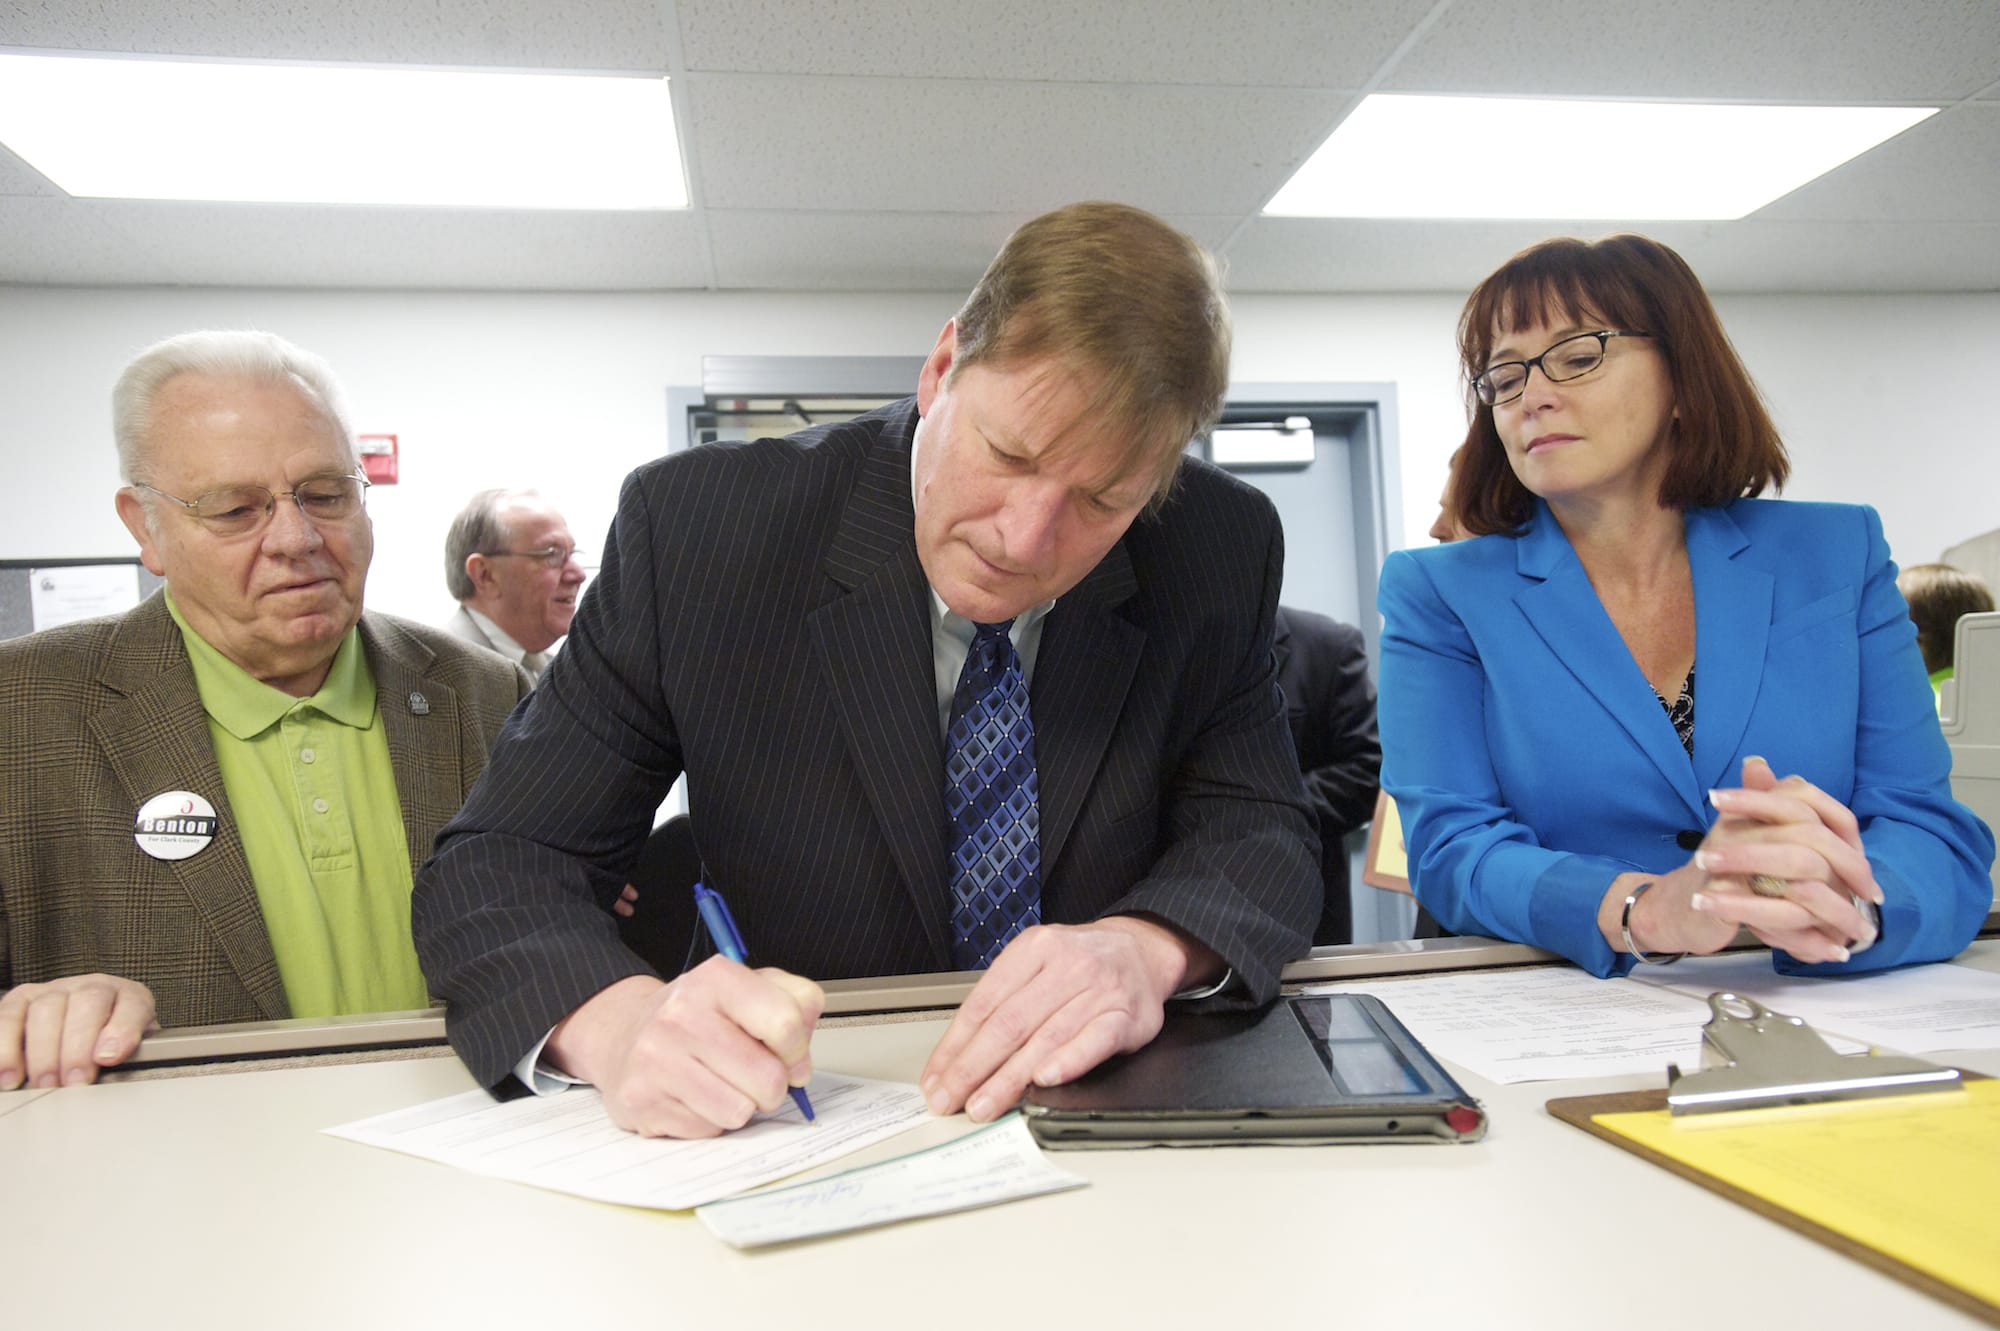 Craig Pridemore, center, files as a candidate for Clark County commissioner at the Clark County Elections Office on Monday as  Ed Barnes, left, and Kelly Love Parker look on.